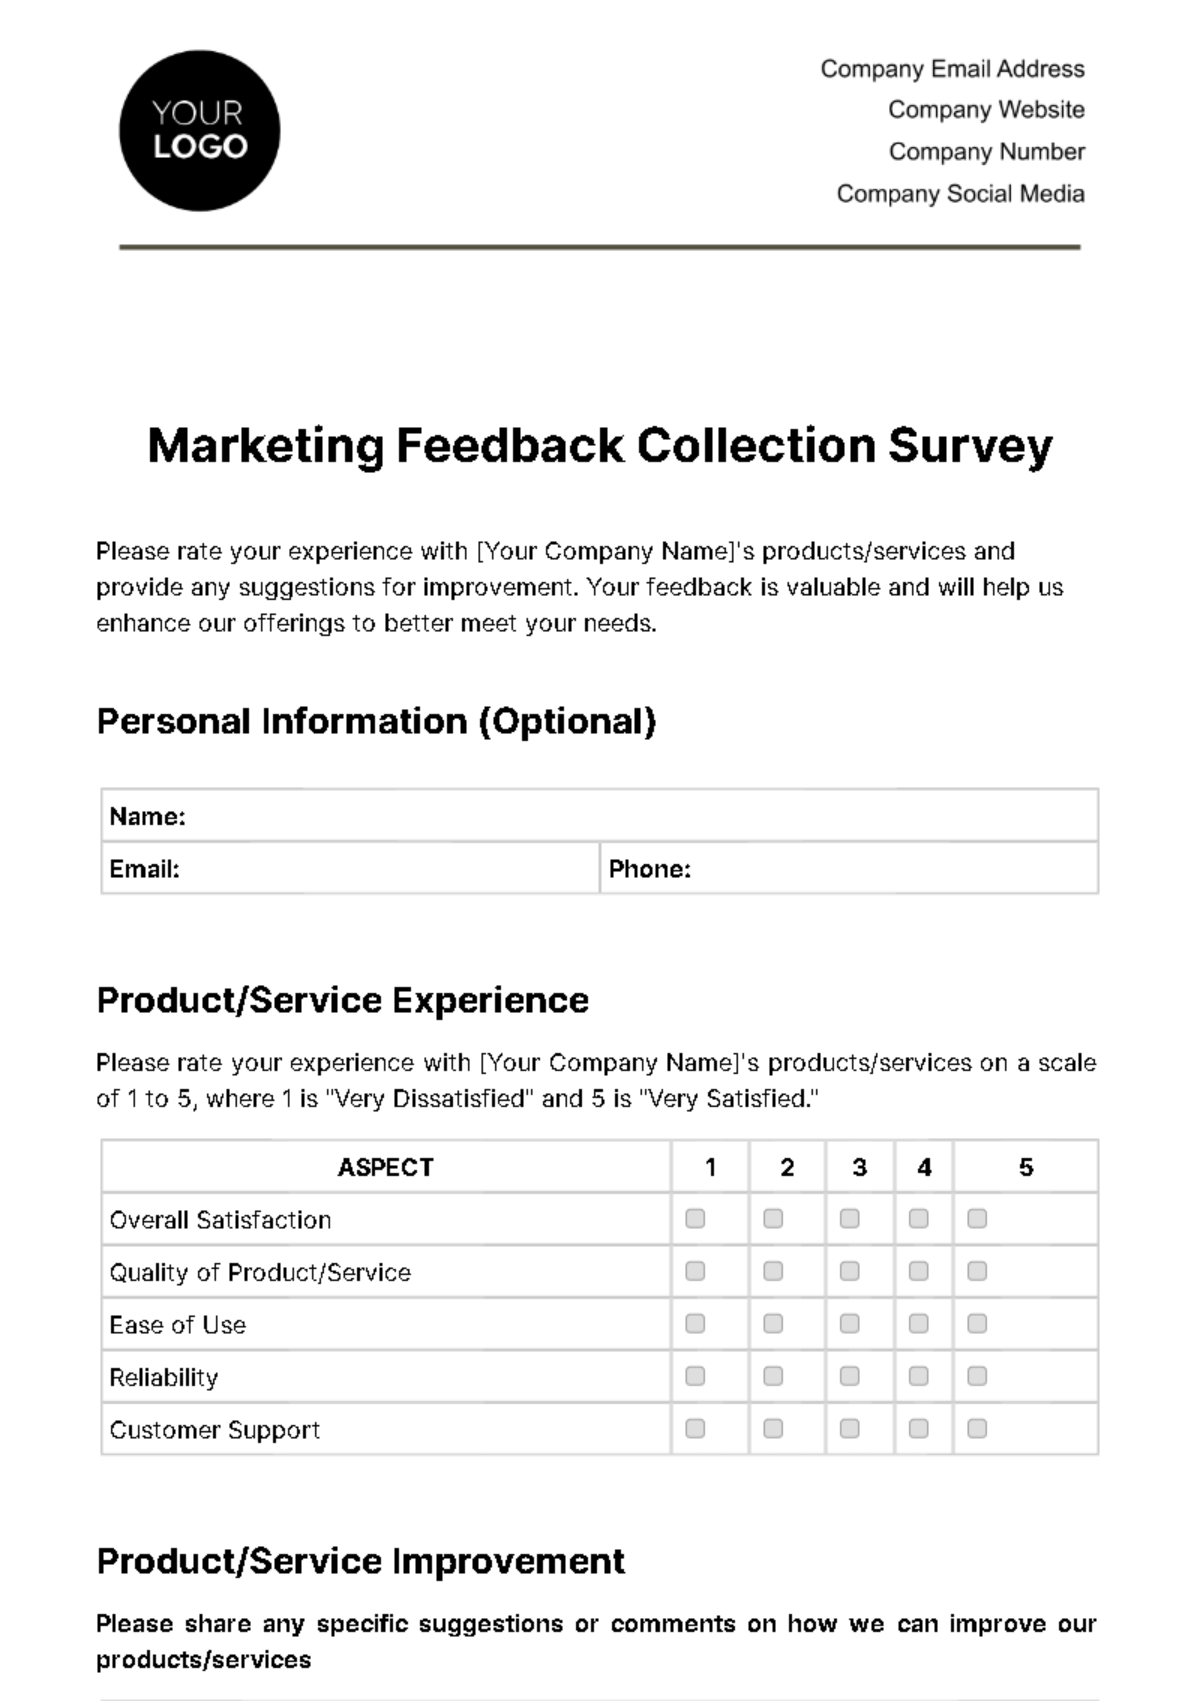 Free Marketing Feedback Collection Survey Template